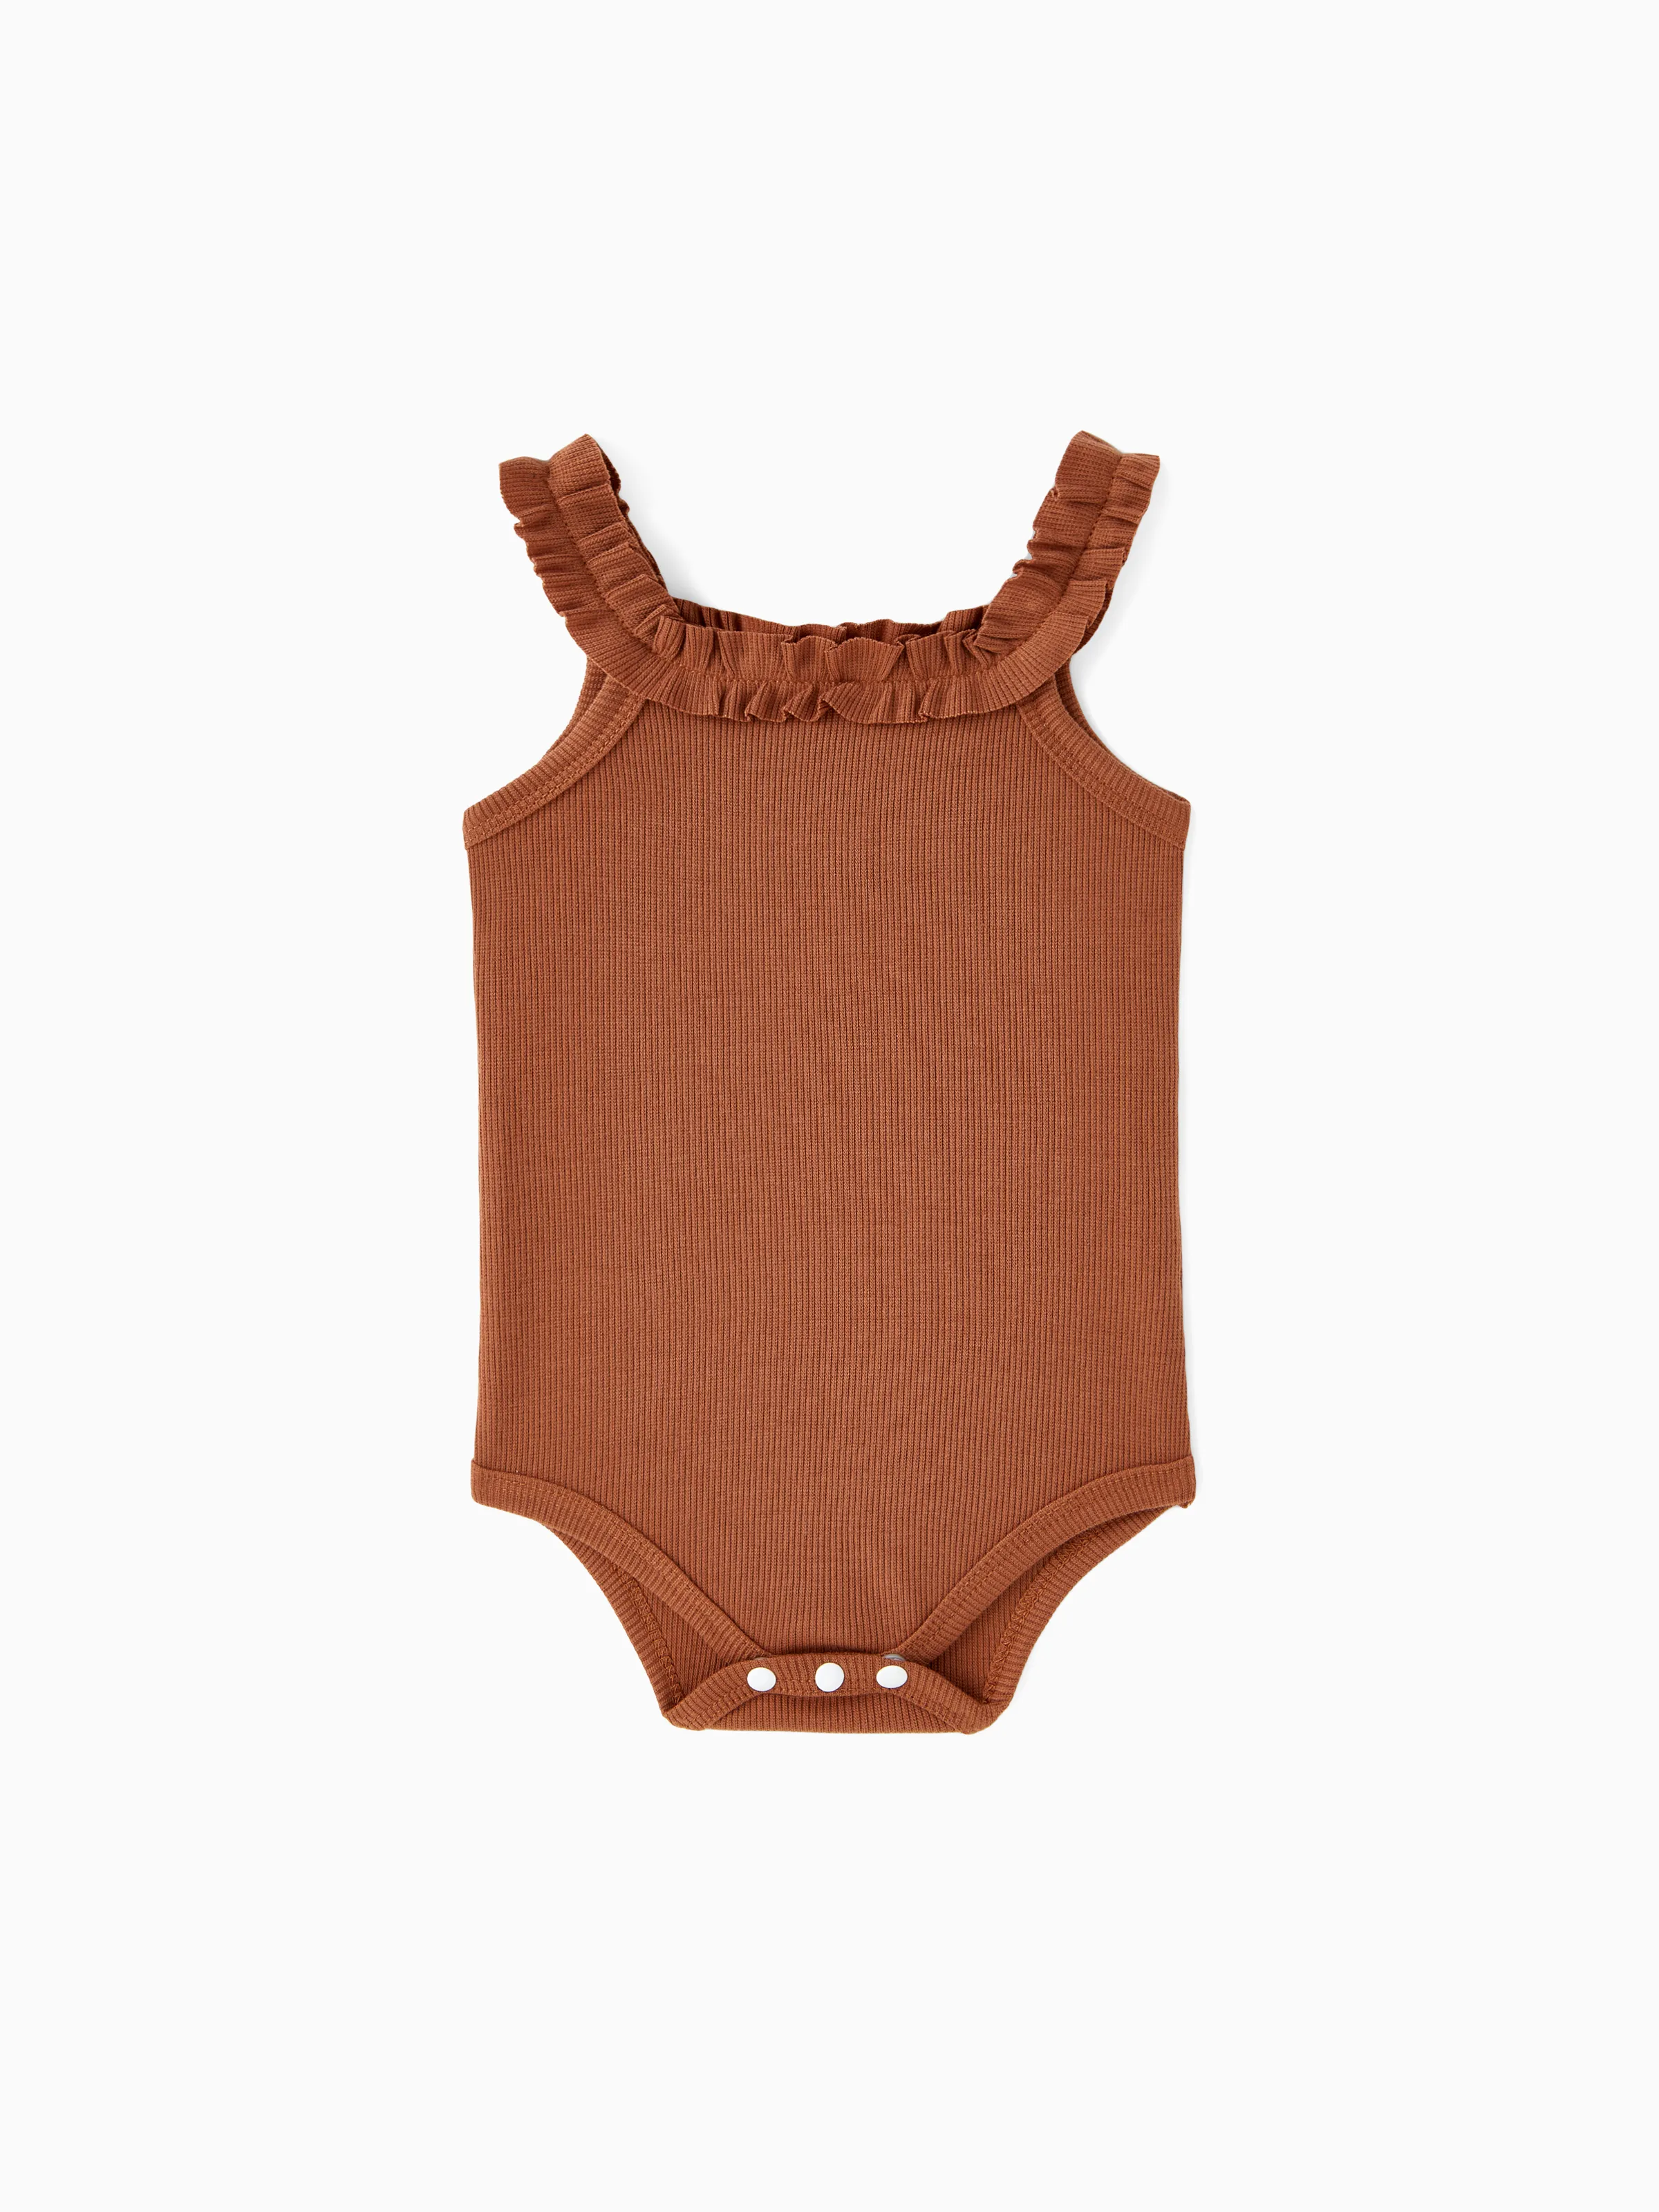 

A Cute Sleeveless Romper with Agaric Edge for Baby Girl, in Polyester-Cotton-Spandex Fabric